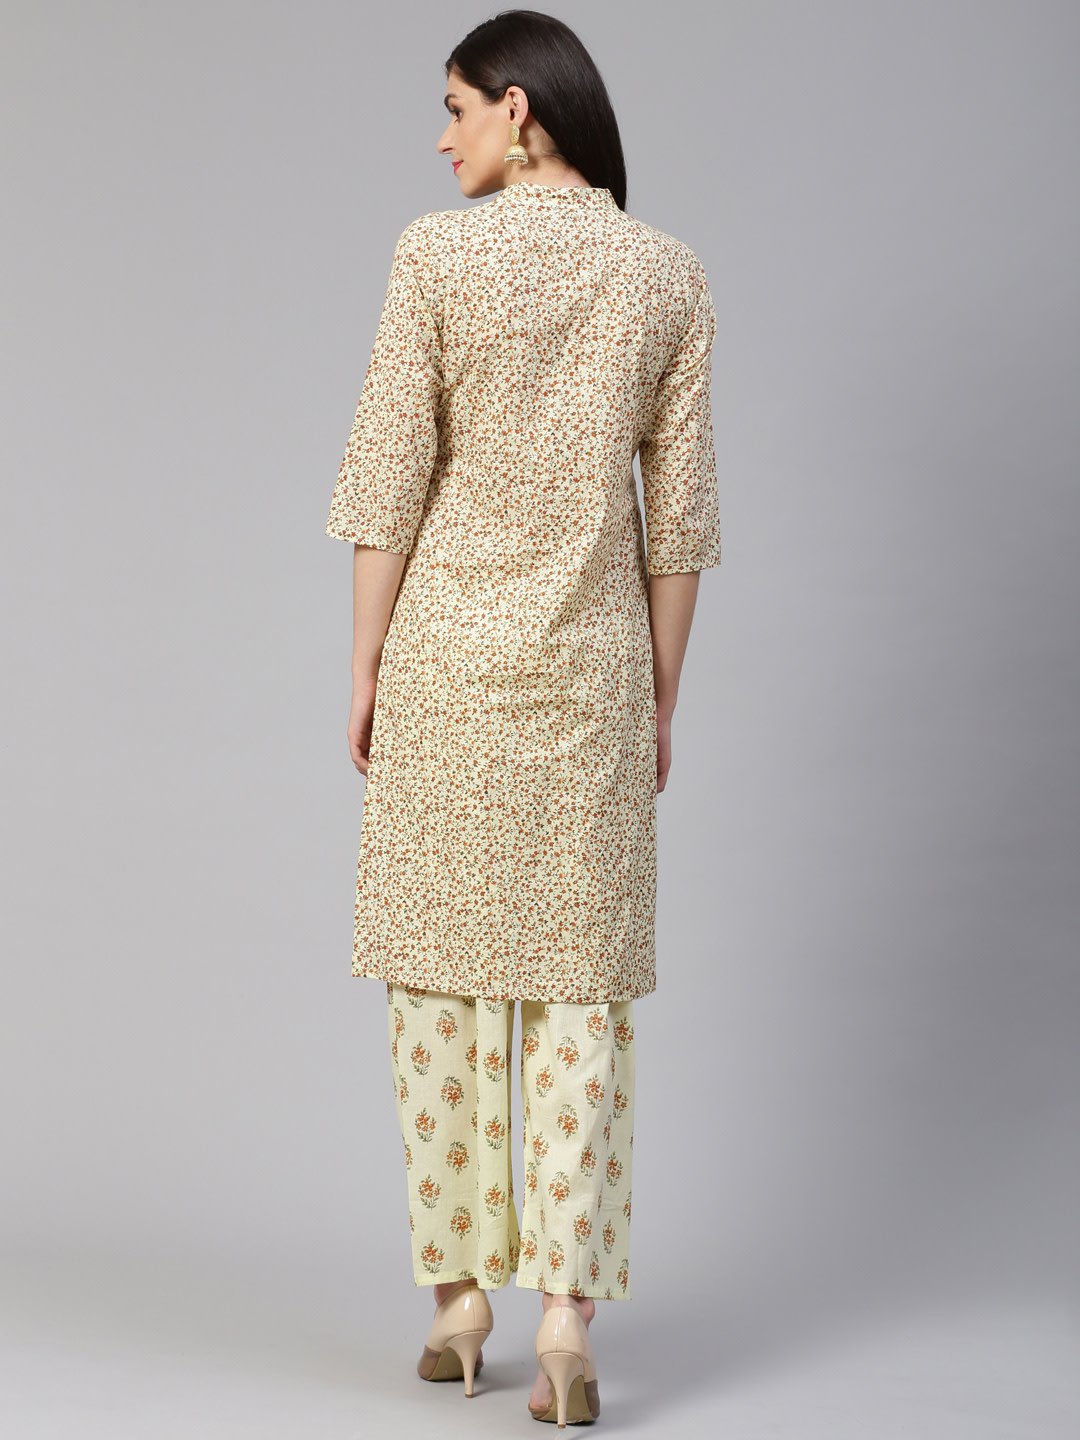 Women's Yellow Floral Printed Kurta with Palazzos - Jompers